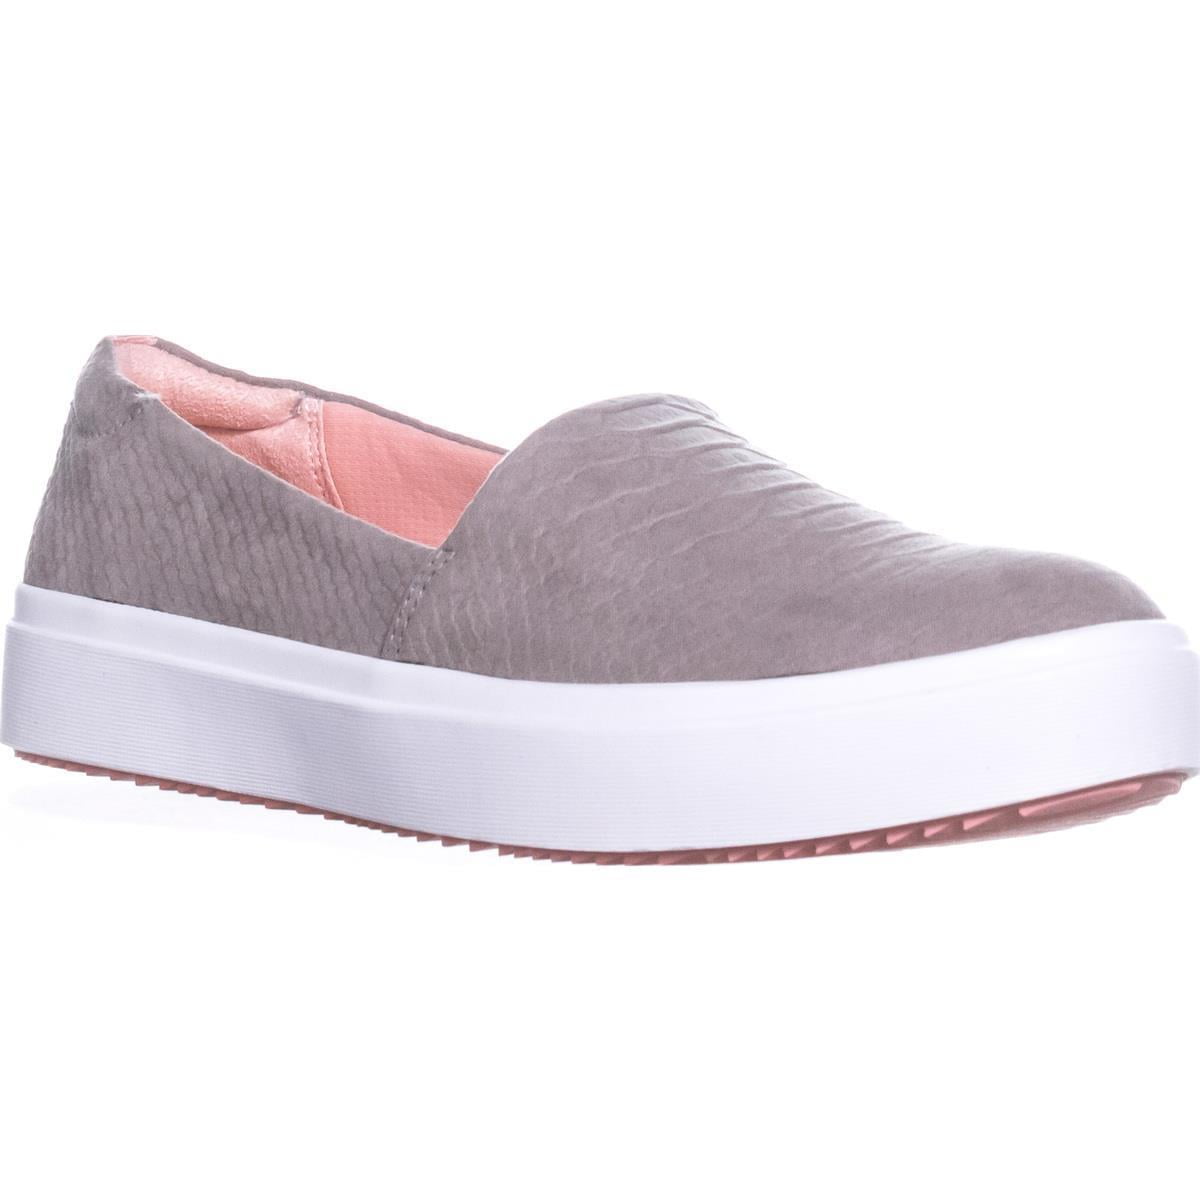 Womens Dr. Scholl's Wandered Platform Fashion Sneakers, Grey Snake ...